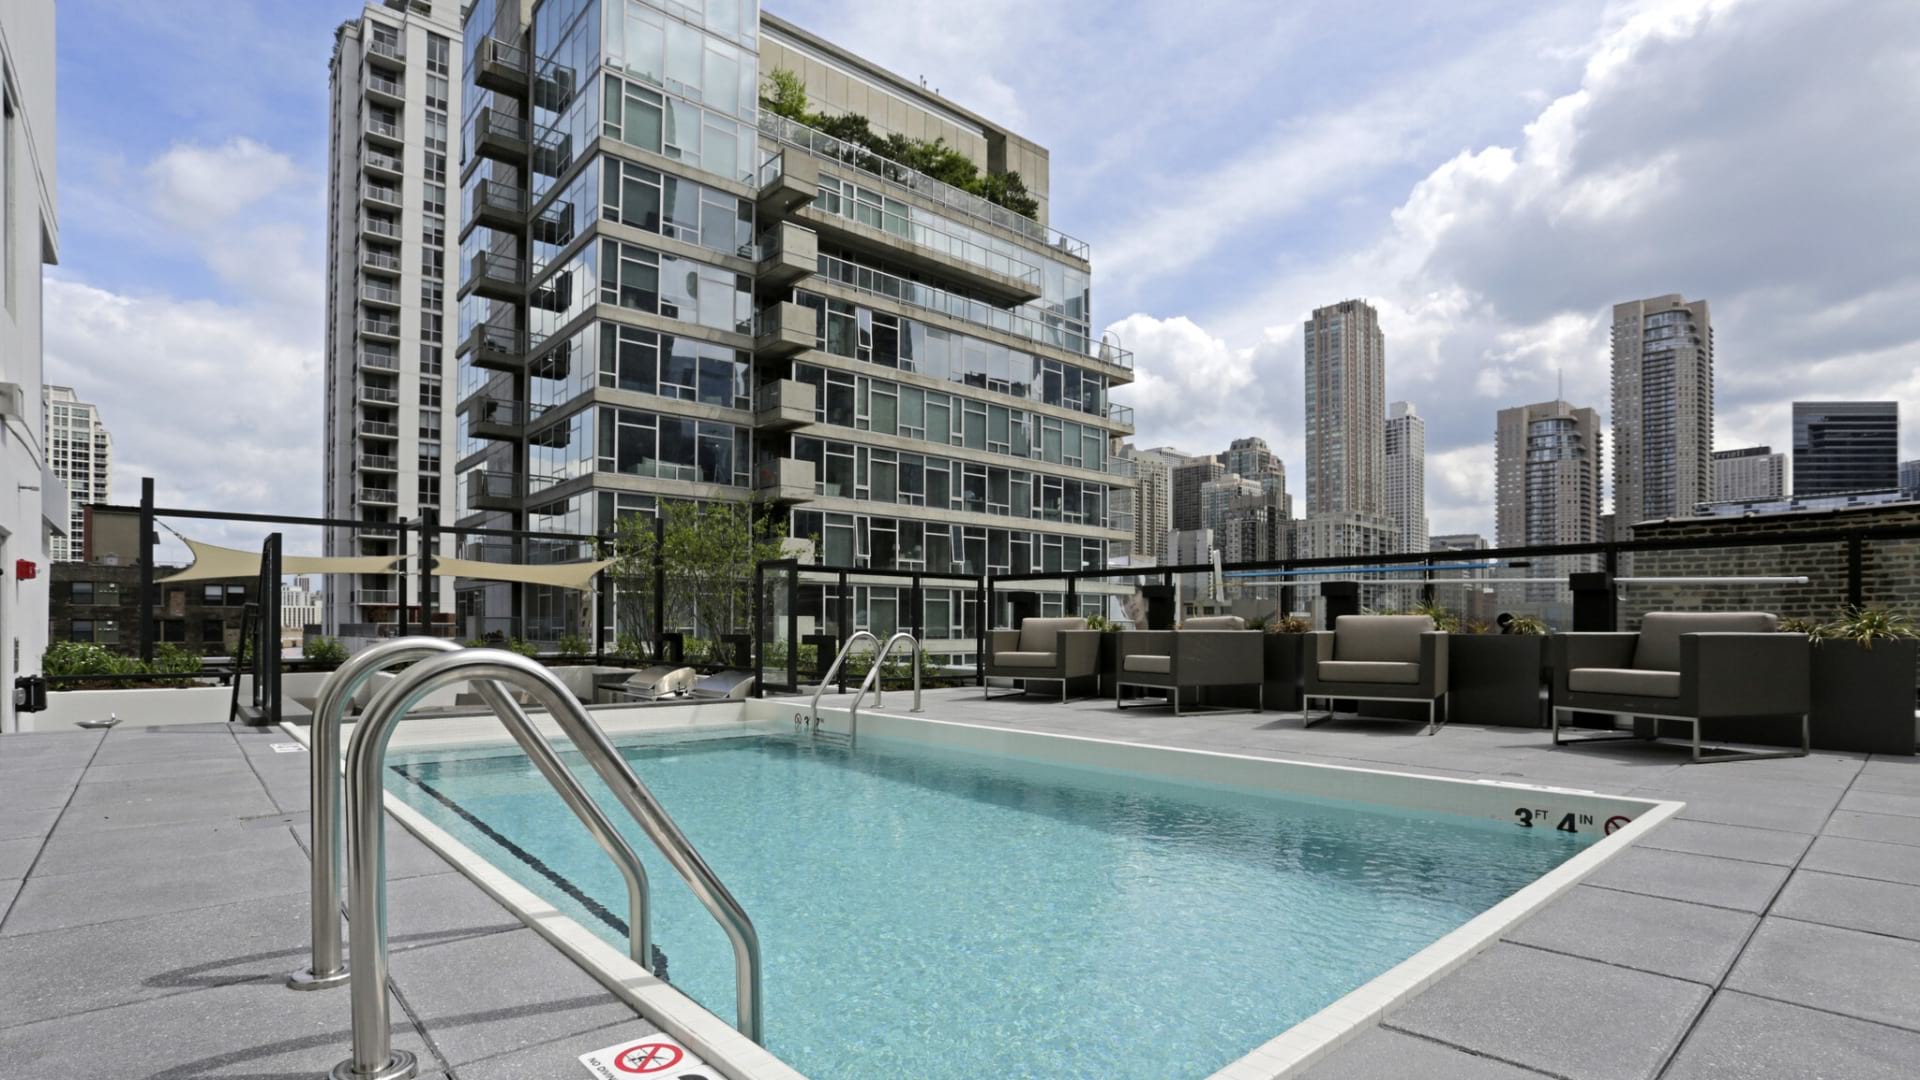 Skyview Pool at Our River North High-Rise Apartments